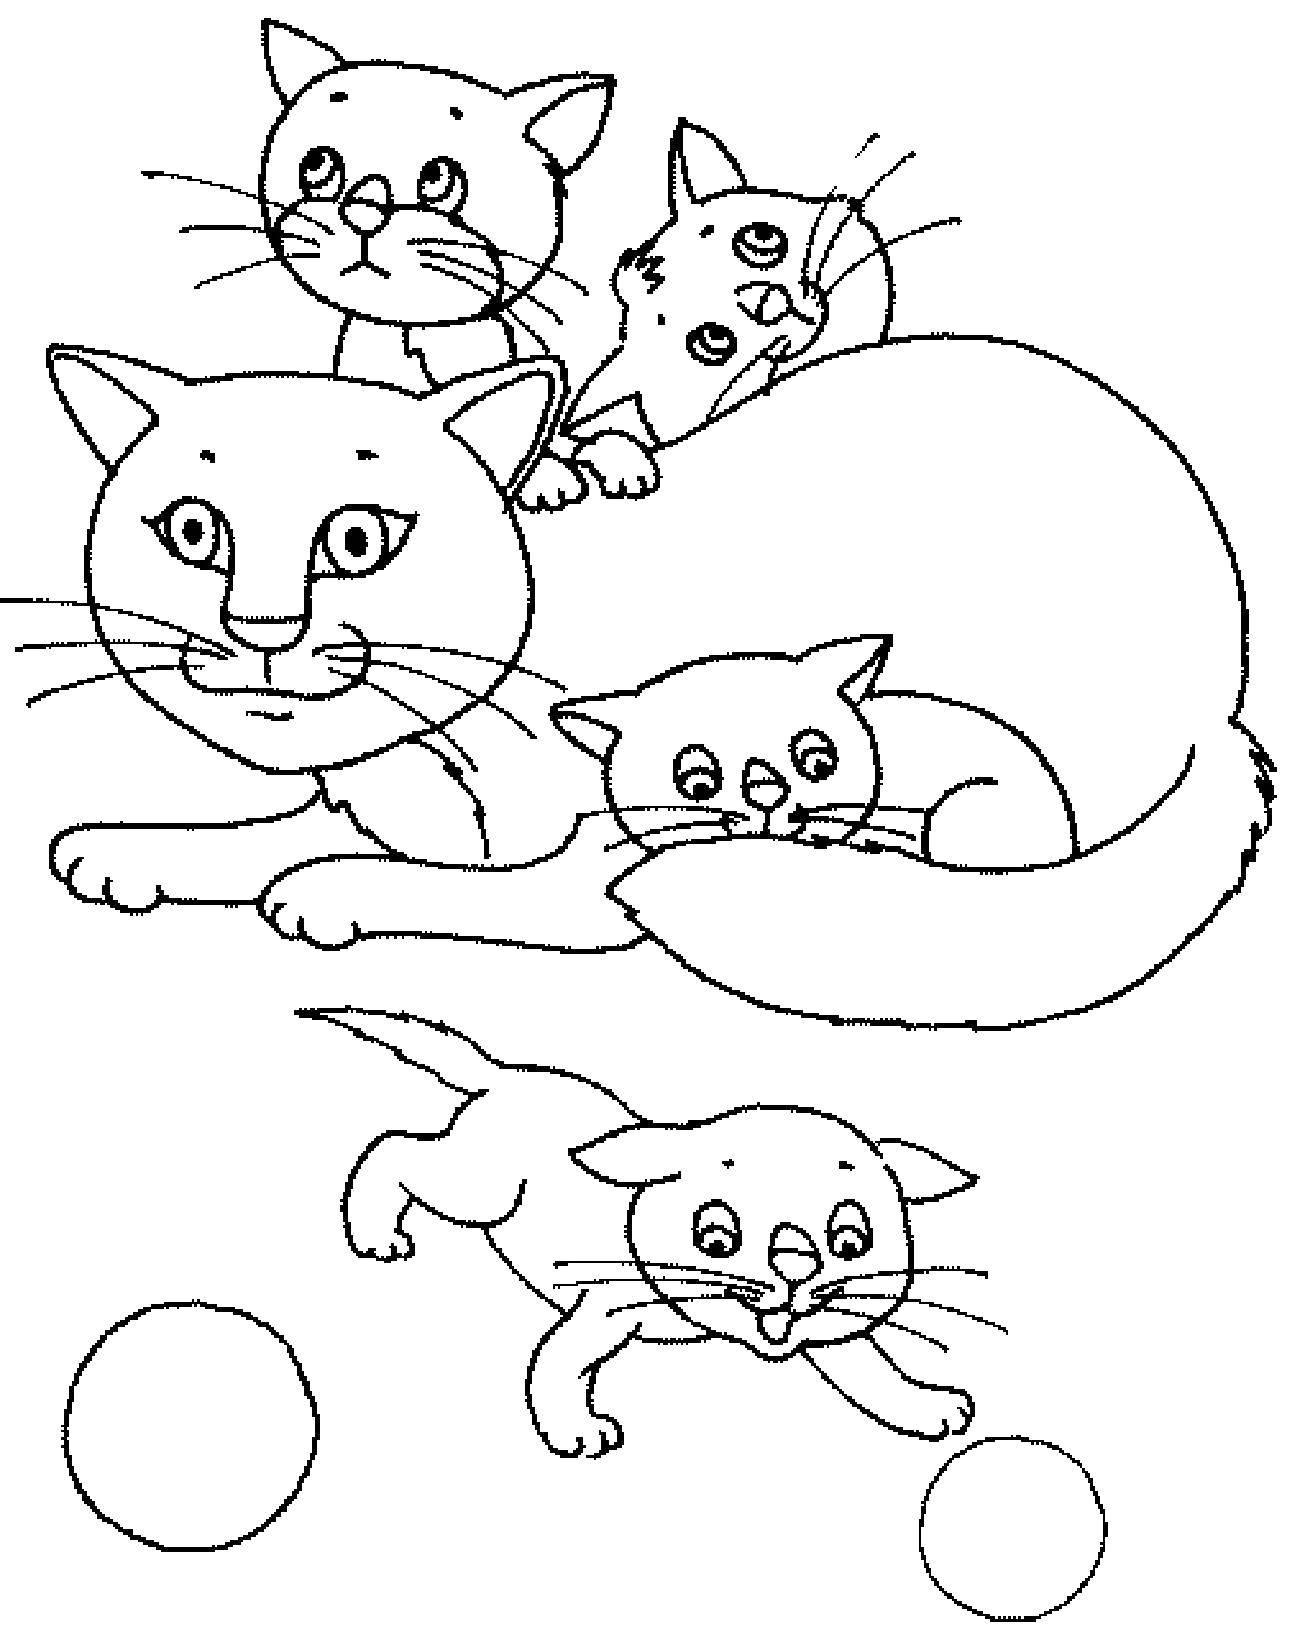 Coloring Cat with kittens. Category Animals. Tags:  animals, cats, kittens.